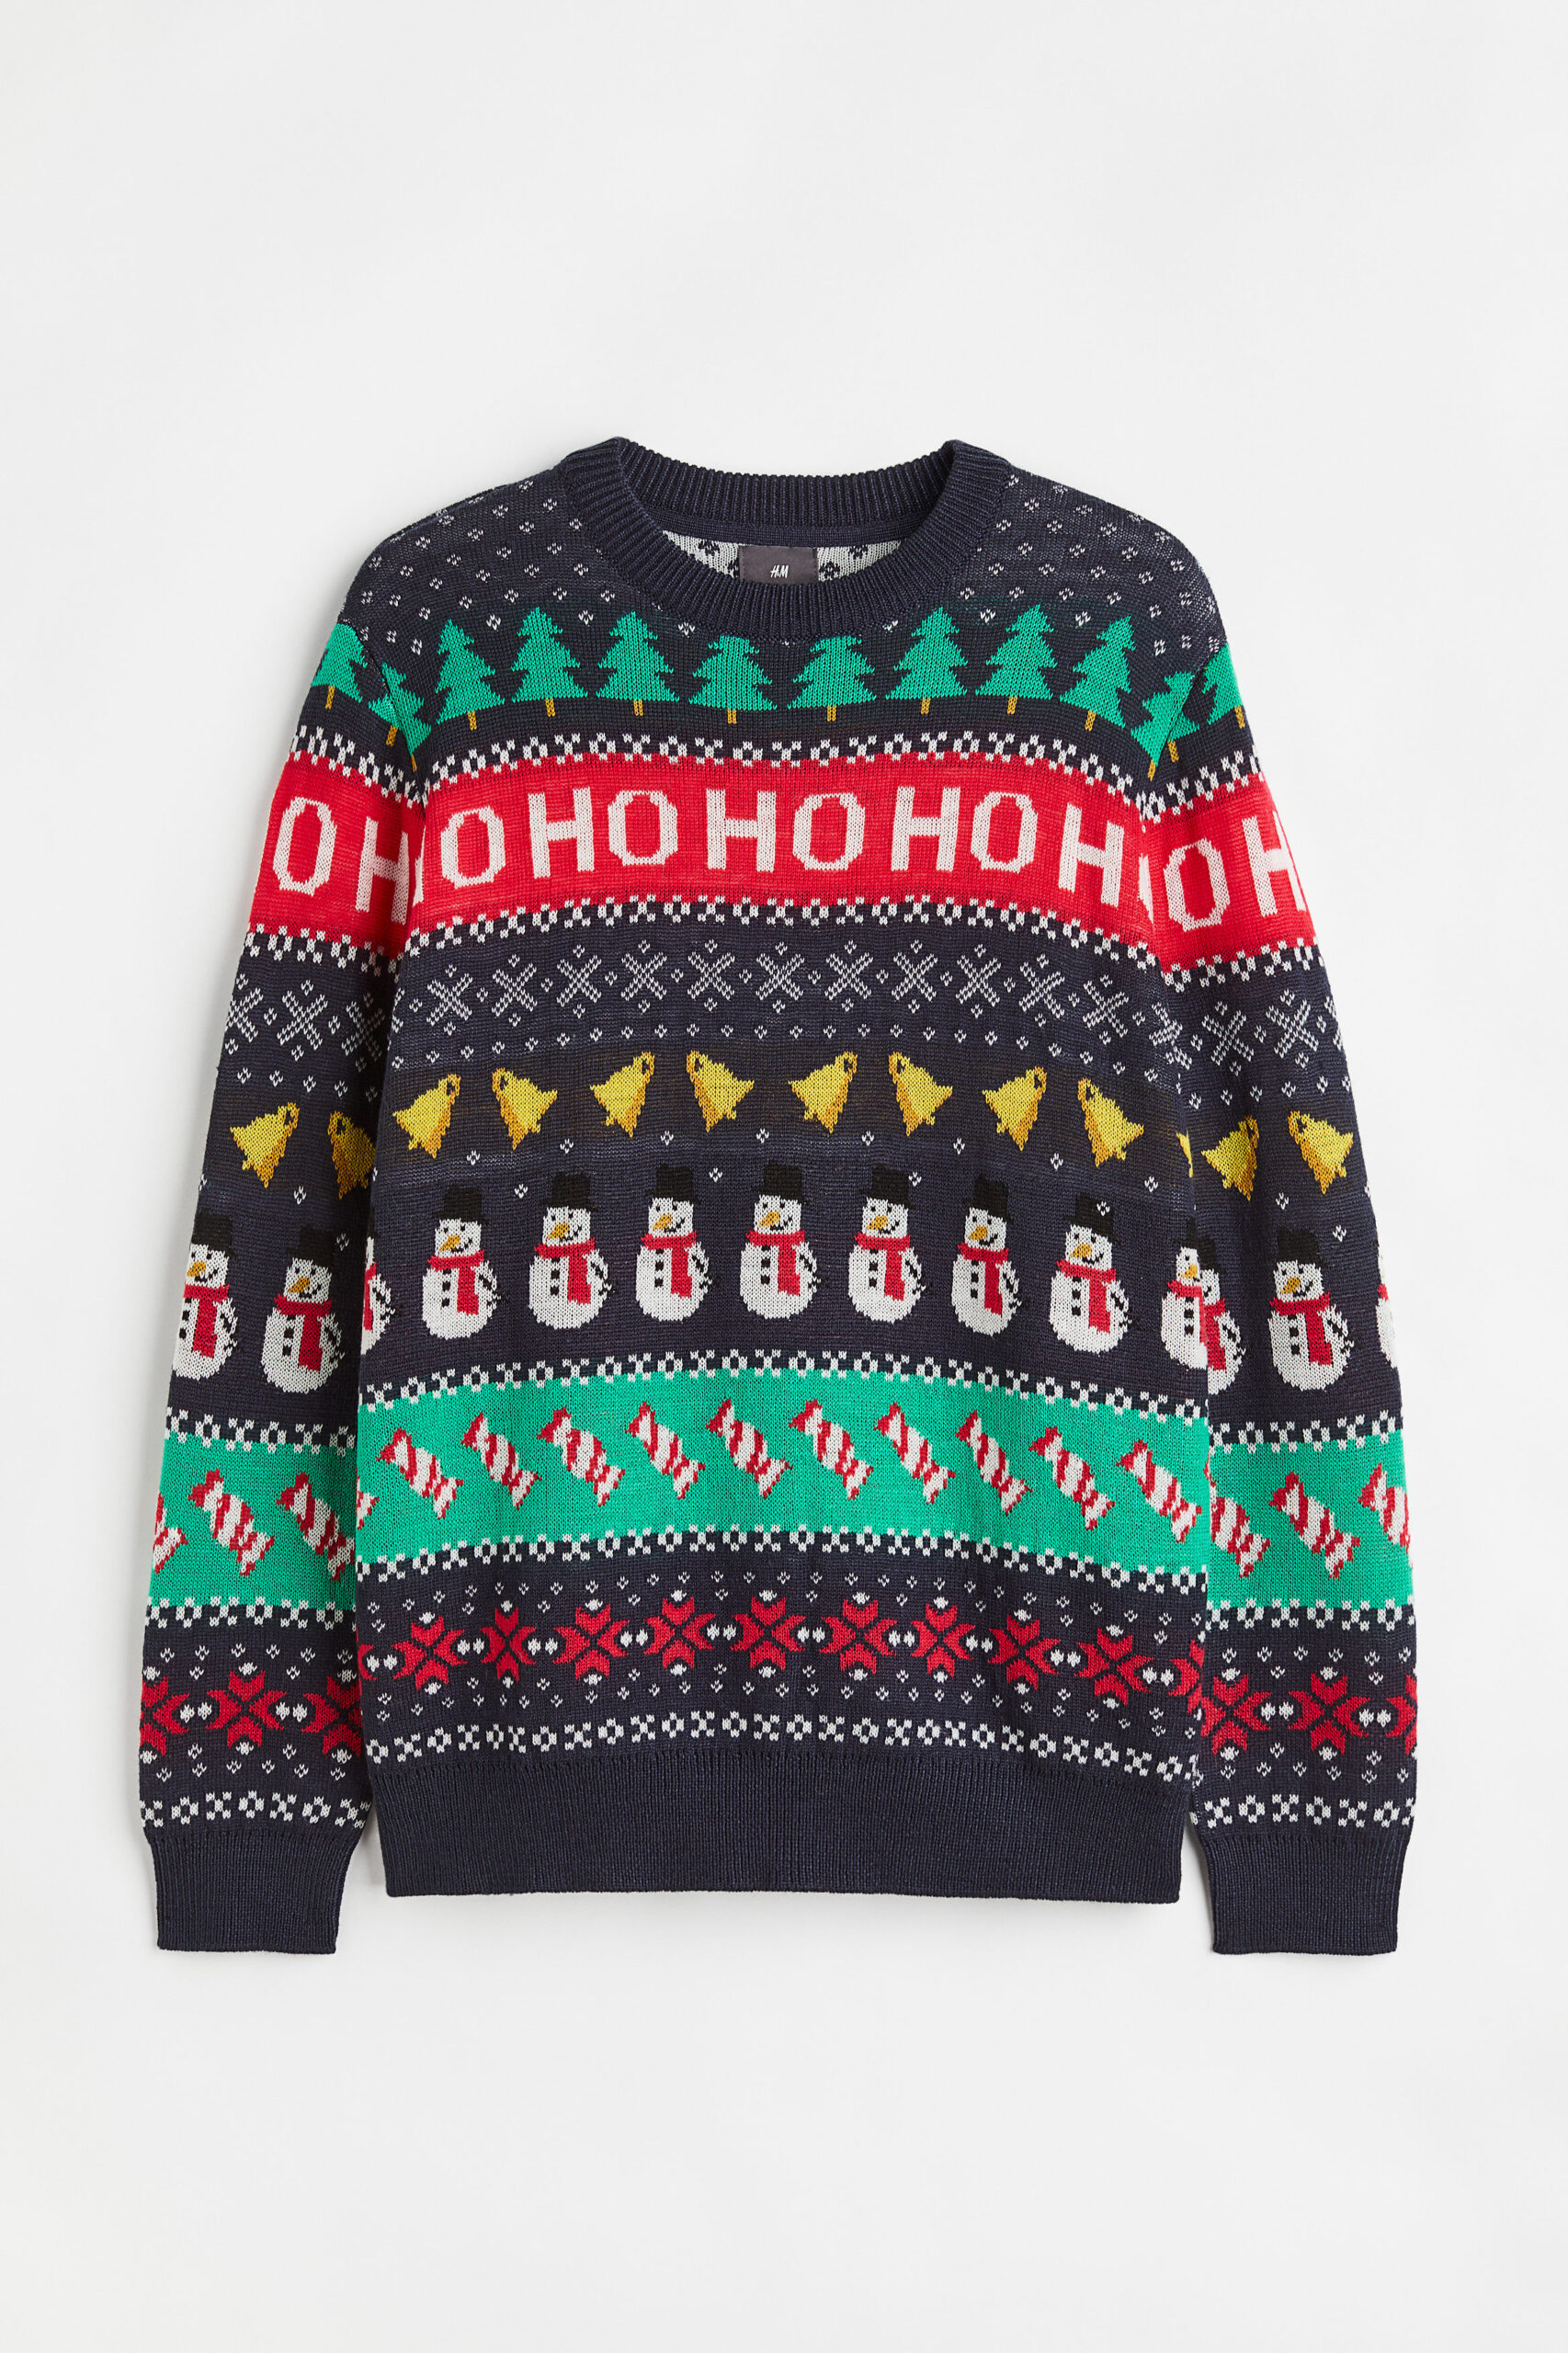 men's jacquard-knit sweater with patterns of trees, bells, snowmen, candies, and "ho ho ho"